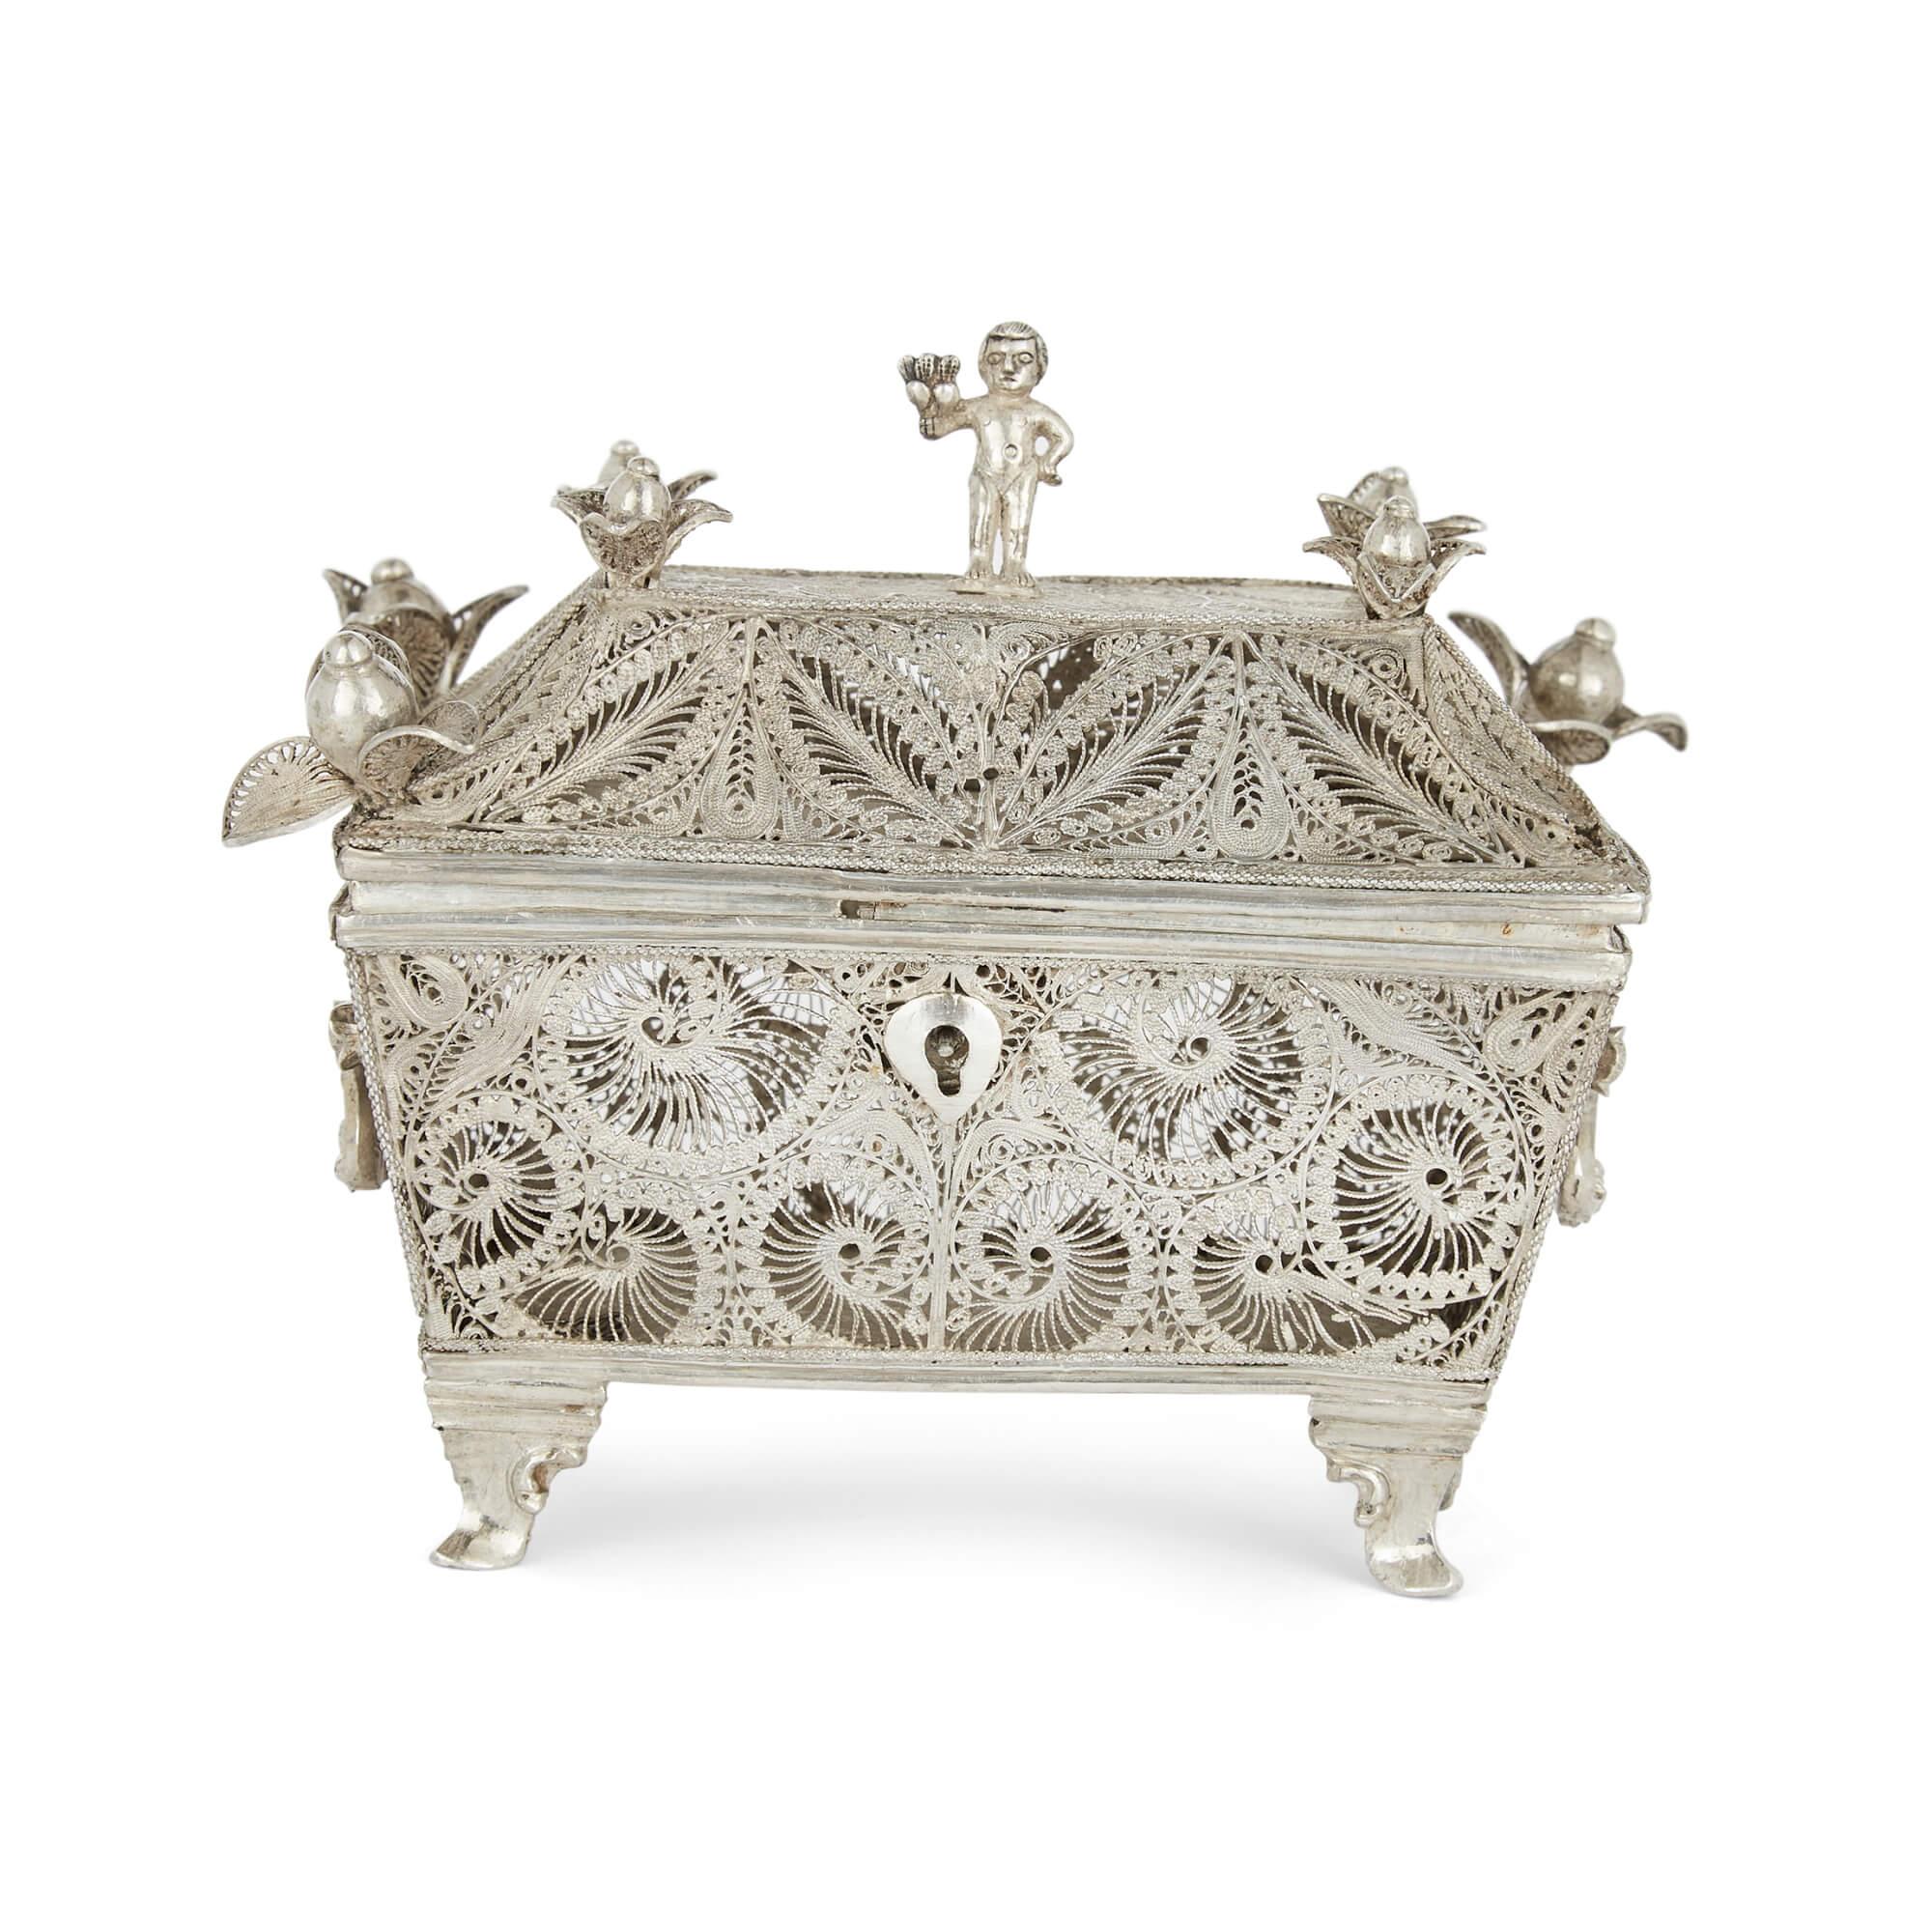 Crafted with superb skill in silver filigree, this beautiful and delicate box is most likely continental-made, dating from the early 20th century. Its exact origin is unclear, and it may have been intended as a spice box, however what is clear is